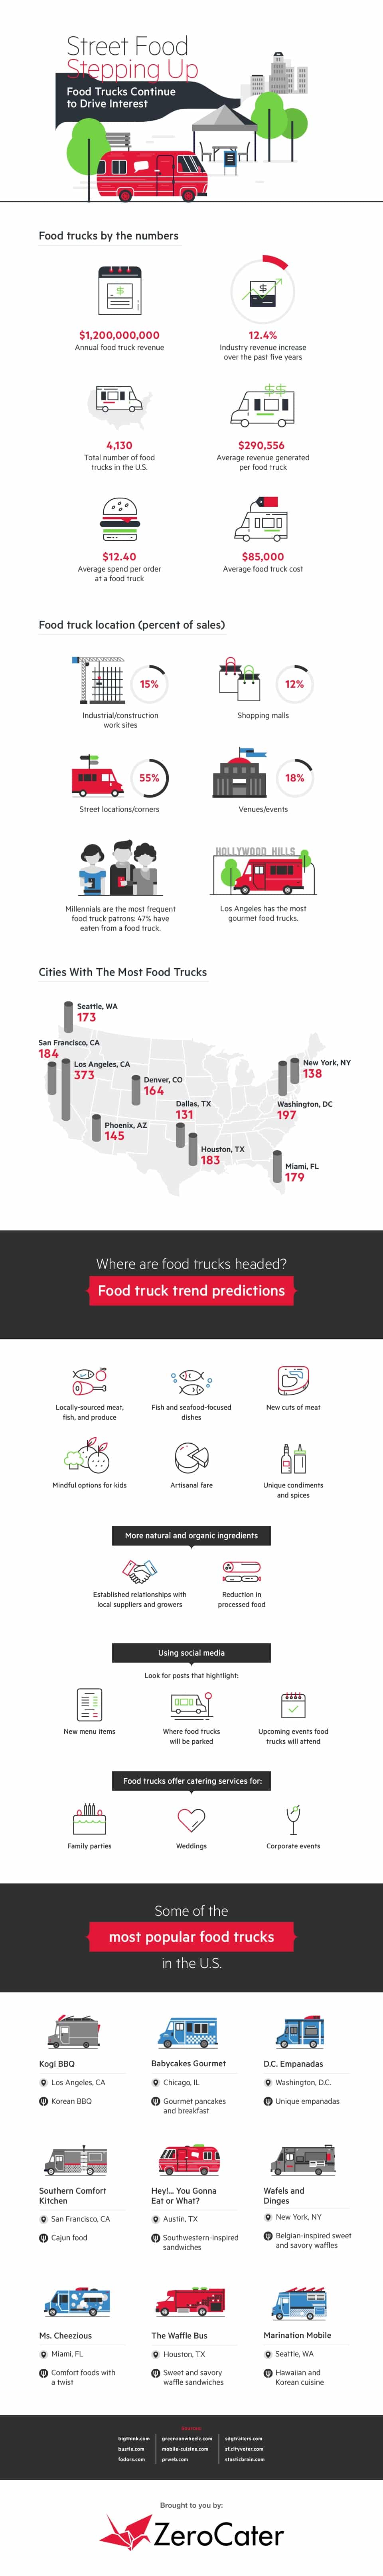 Food Trucks Are Not a Fad Infographic